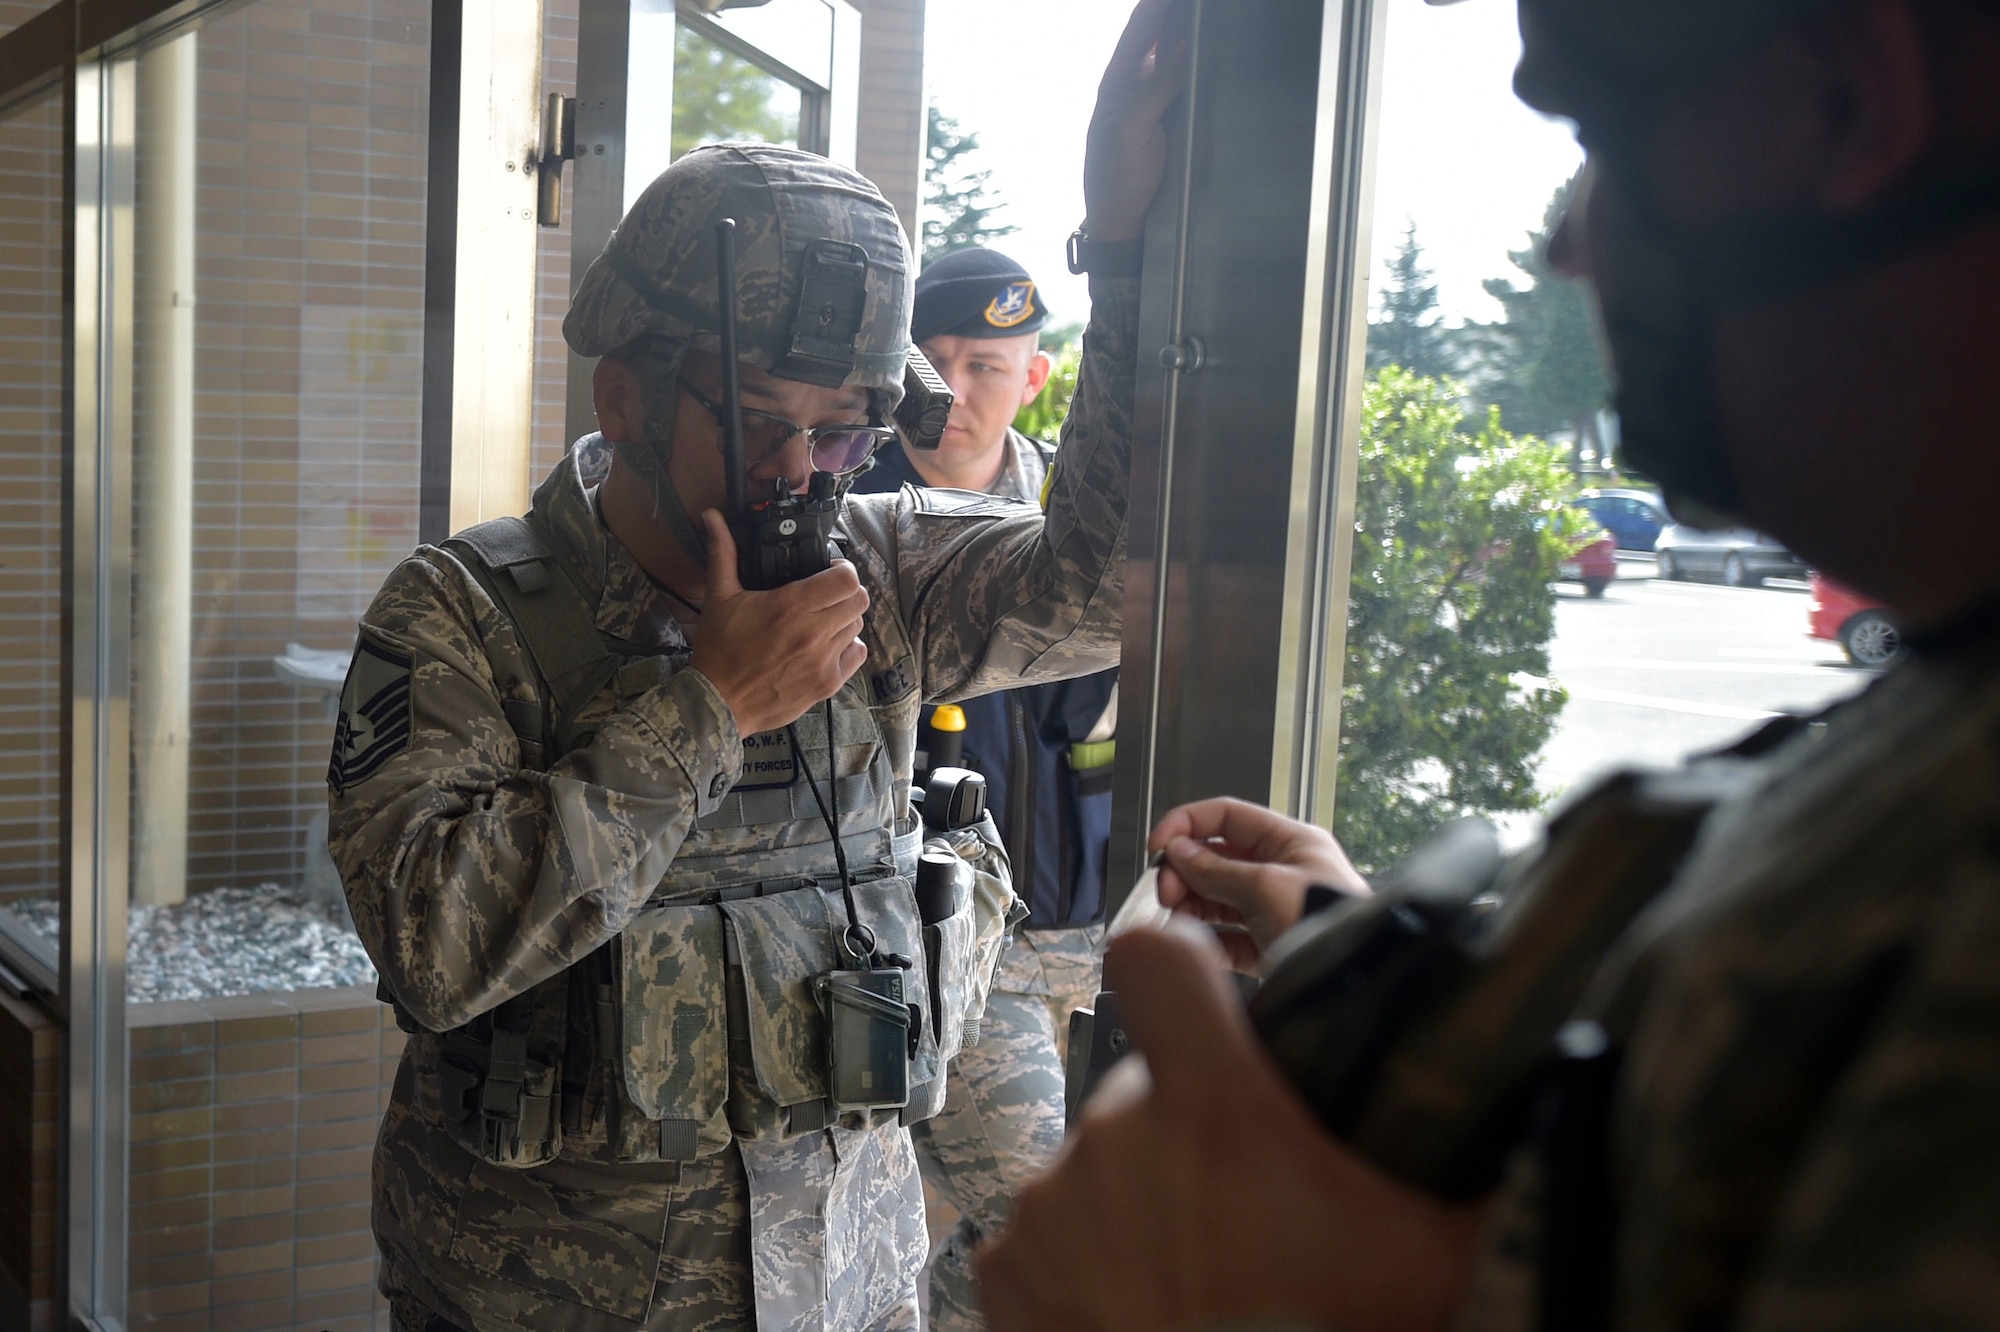 U.S. Air Force Master Sgt. William Castro, the 35th Security Forces Squadron bravo flight chief, talks on a radio during an active shooter exercise at Misawa Air Base, Sept. 18, 2018. The training exercise focused on how quickly and effectively first responders locate the source of the threat, while treating victims. (U.S. Air Force photo by Tech. Sgt. Stephany Johnson)